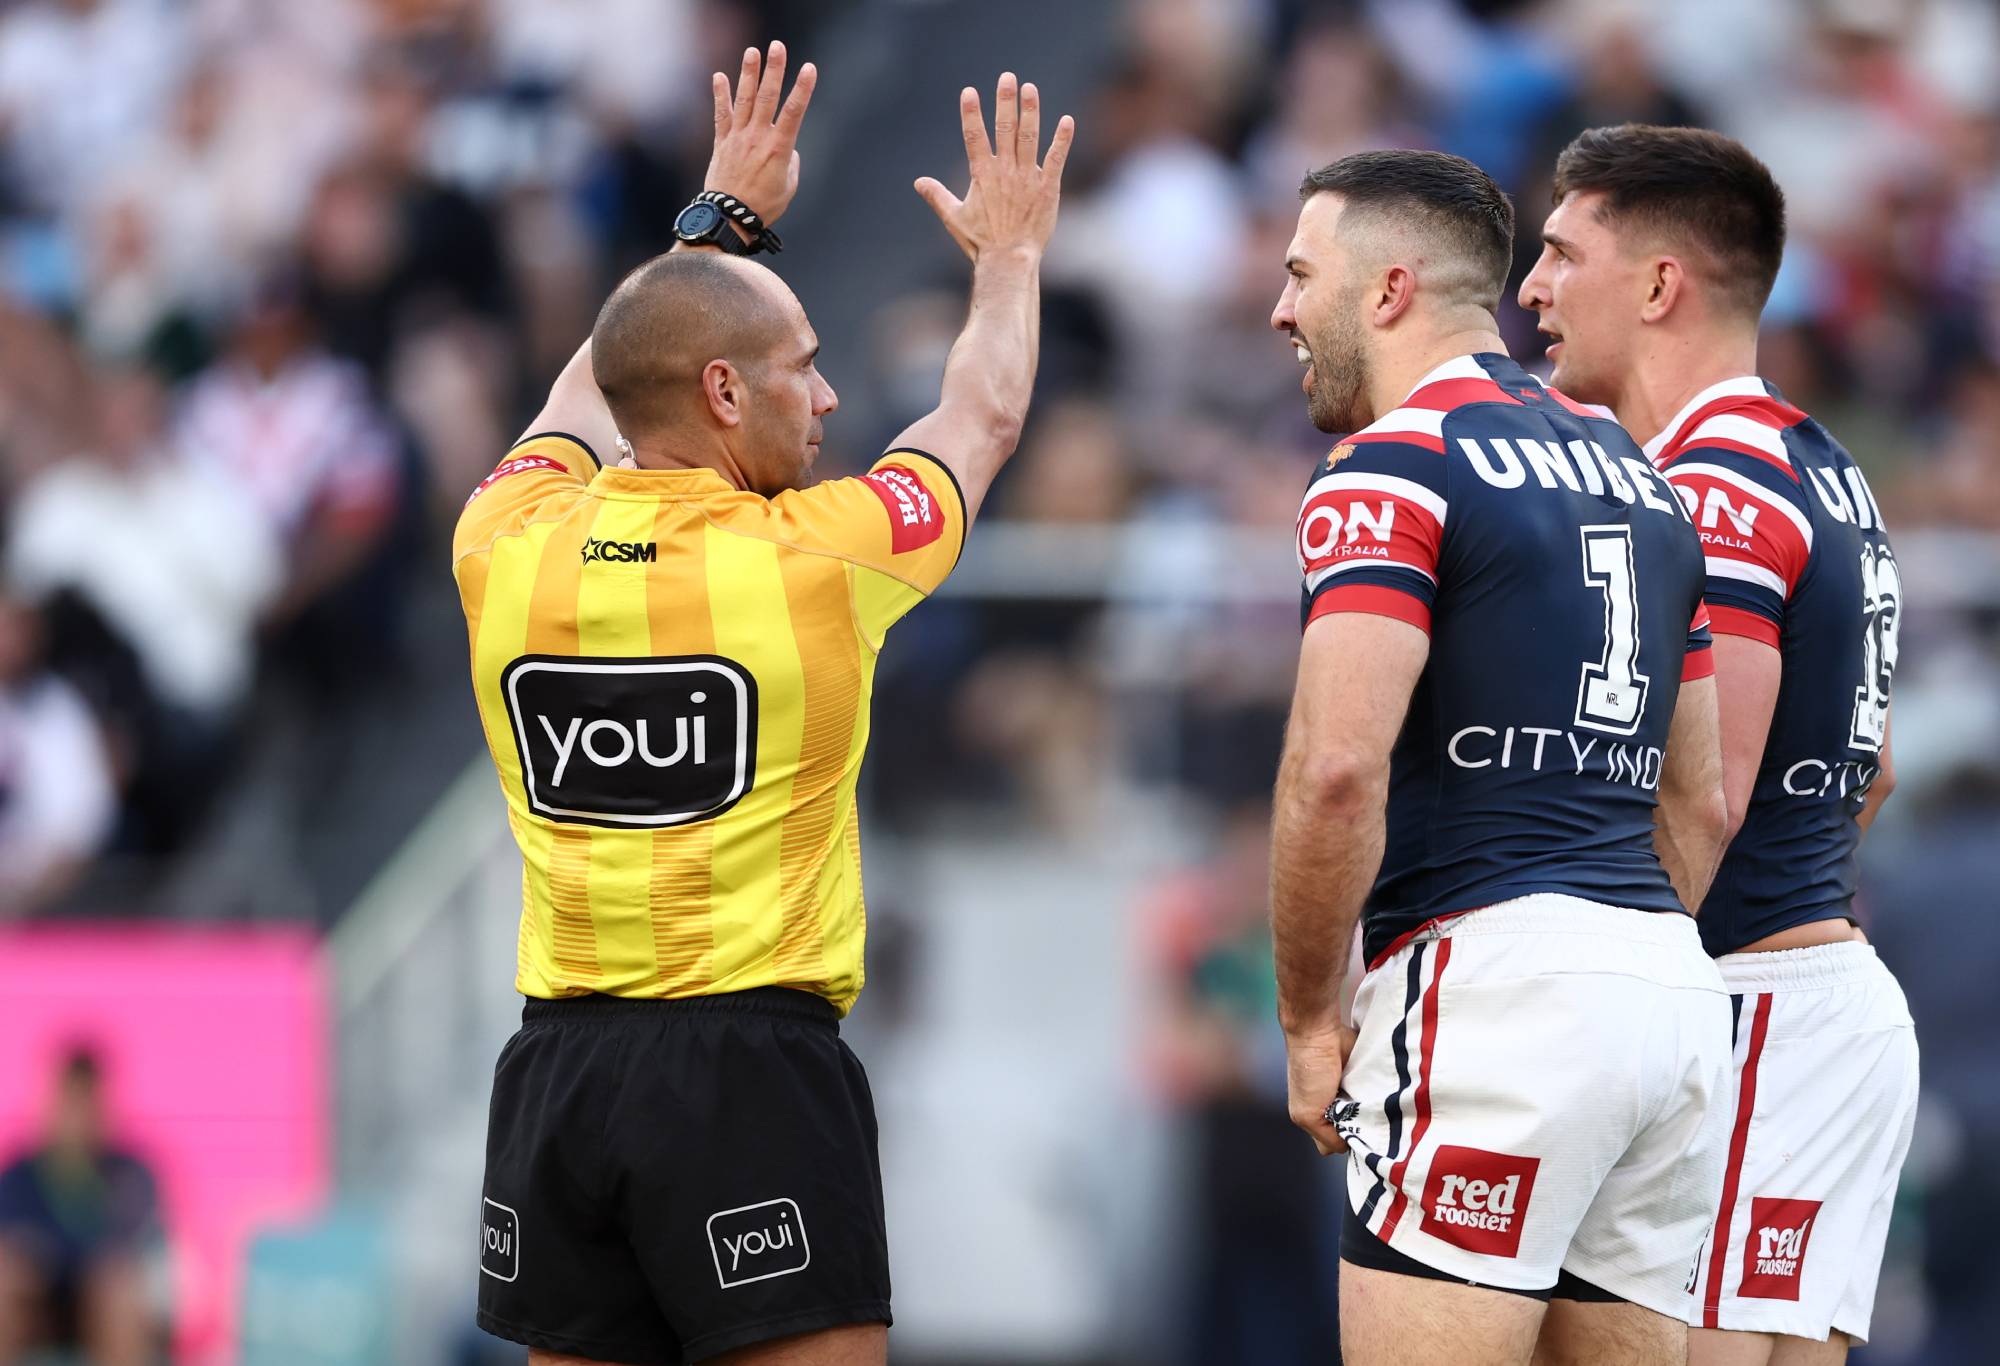 SYDNEY, AUSTRALIA - SEPTEMBER 11: Victor Radley of the Roosters is sent to the sin binned by referee Ashley Klein during the NRL Elimination Final match between the Sydney Roosters and the South Sydney Rabbitohs at Allianz Stadium on September 11, 2022 in Sydney, Australia. (Photo by Matt King/Getty Images)